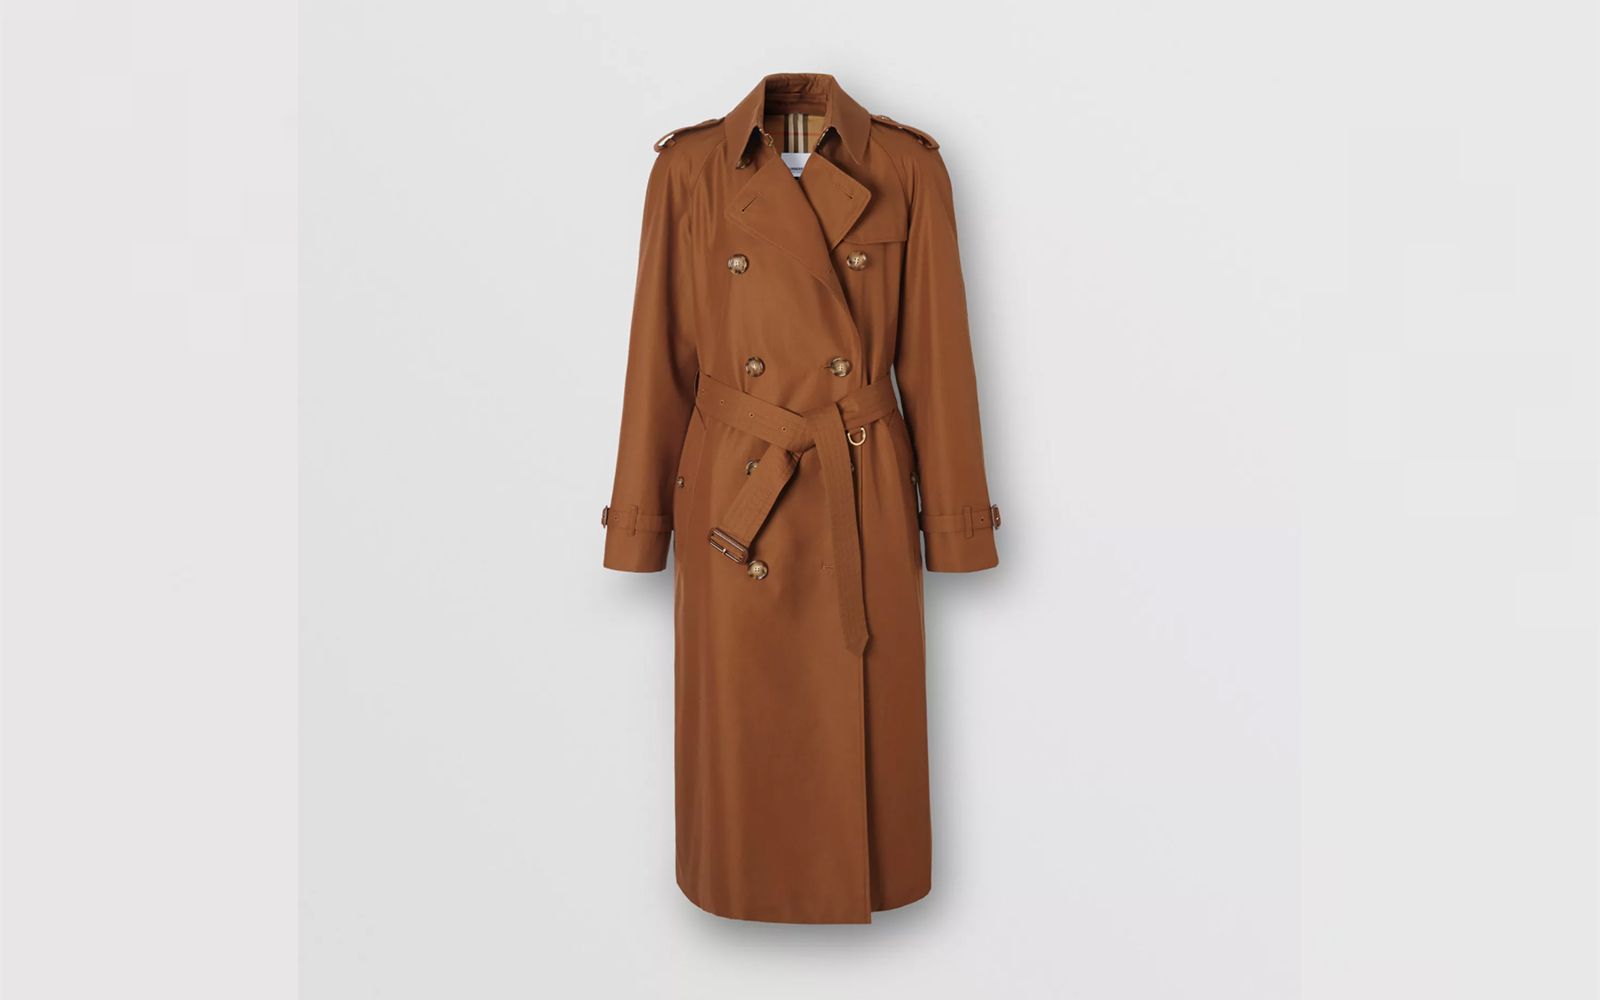 History and evolution of the Trench coat